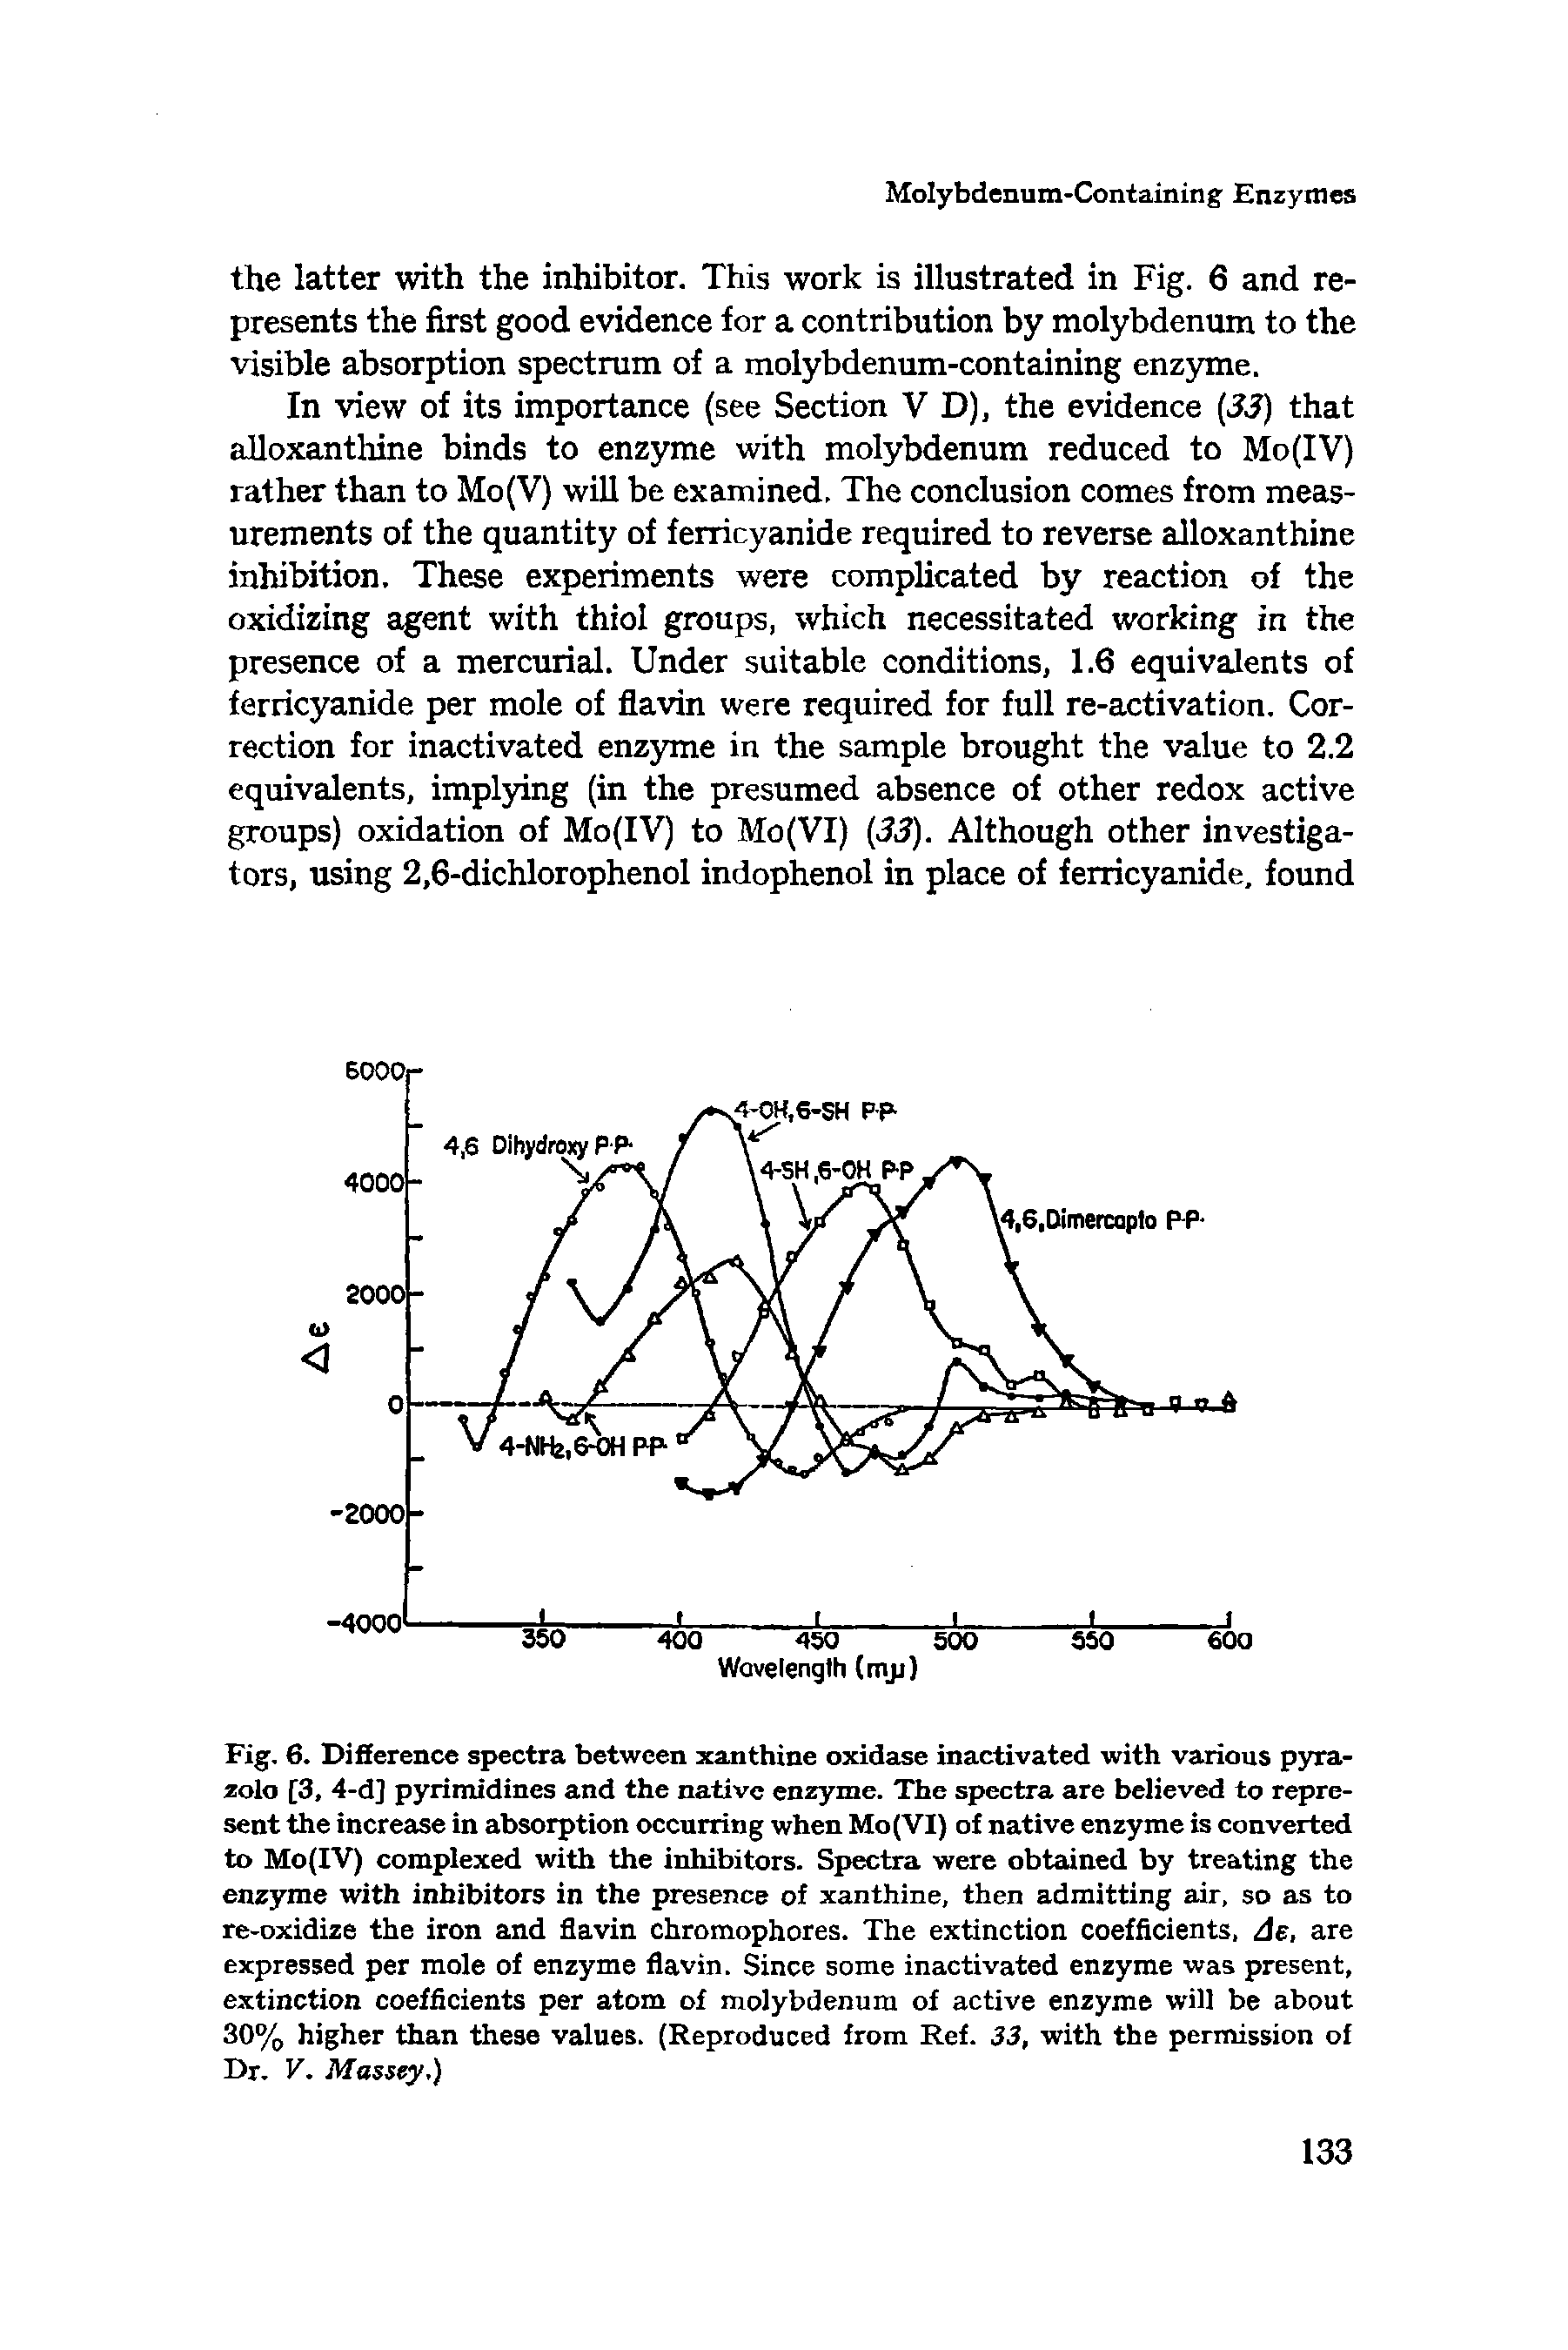 Fig. 6. Difference spectra between xanthine oxidase inactivated with various pyra-zolo [3, 4-d] pyrimidines and the native enzyme. The spectra are believed to represent the increase in absorption occurring when Mo(VI) of native enzyme is converted to Mo(IV) complexed with the inhibitors. Spectra were obtained by treating the enzyme with inhibitors in the presence of xanthine, then admitting air, so as to re-oxidize the iron and flavin chromophores. The extinction coefficients, de, are expressed per mole of enzyme flavin. Since some inactivated enzyme was present, extinction coefficients per atom of molybdenum of active enzyme will be about 30% higher than these values. (Reproduced from Ref. 33, with the permission of Dr. V. Massey.)...